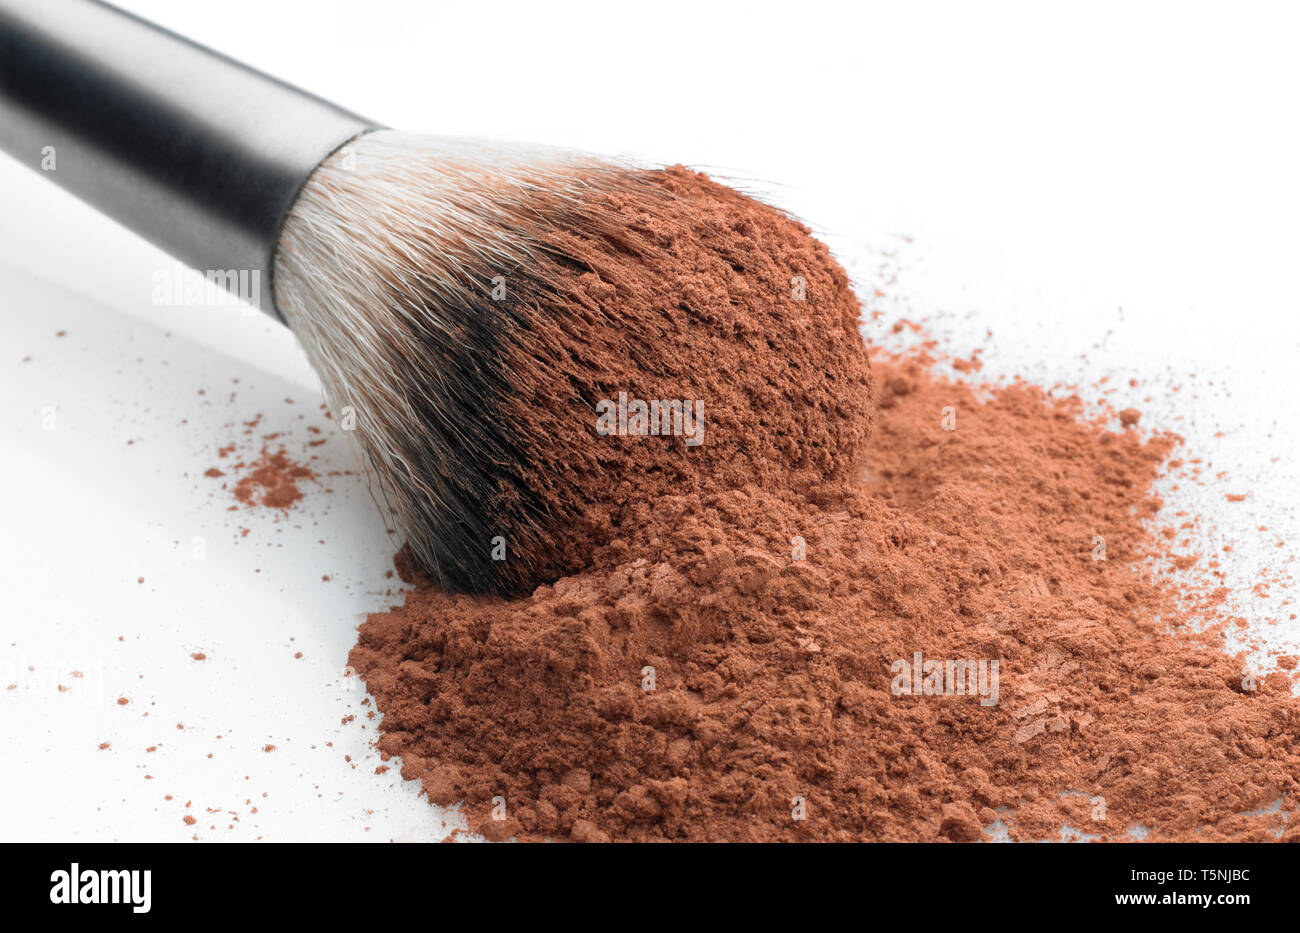 Shallow depth of focus. Close up view of a makeup brush over a pile of cosmetic compact powder. White background Stock Photo